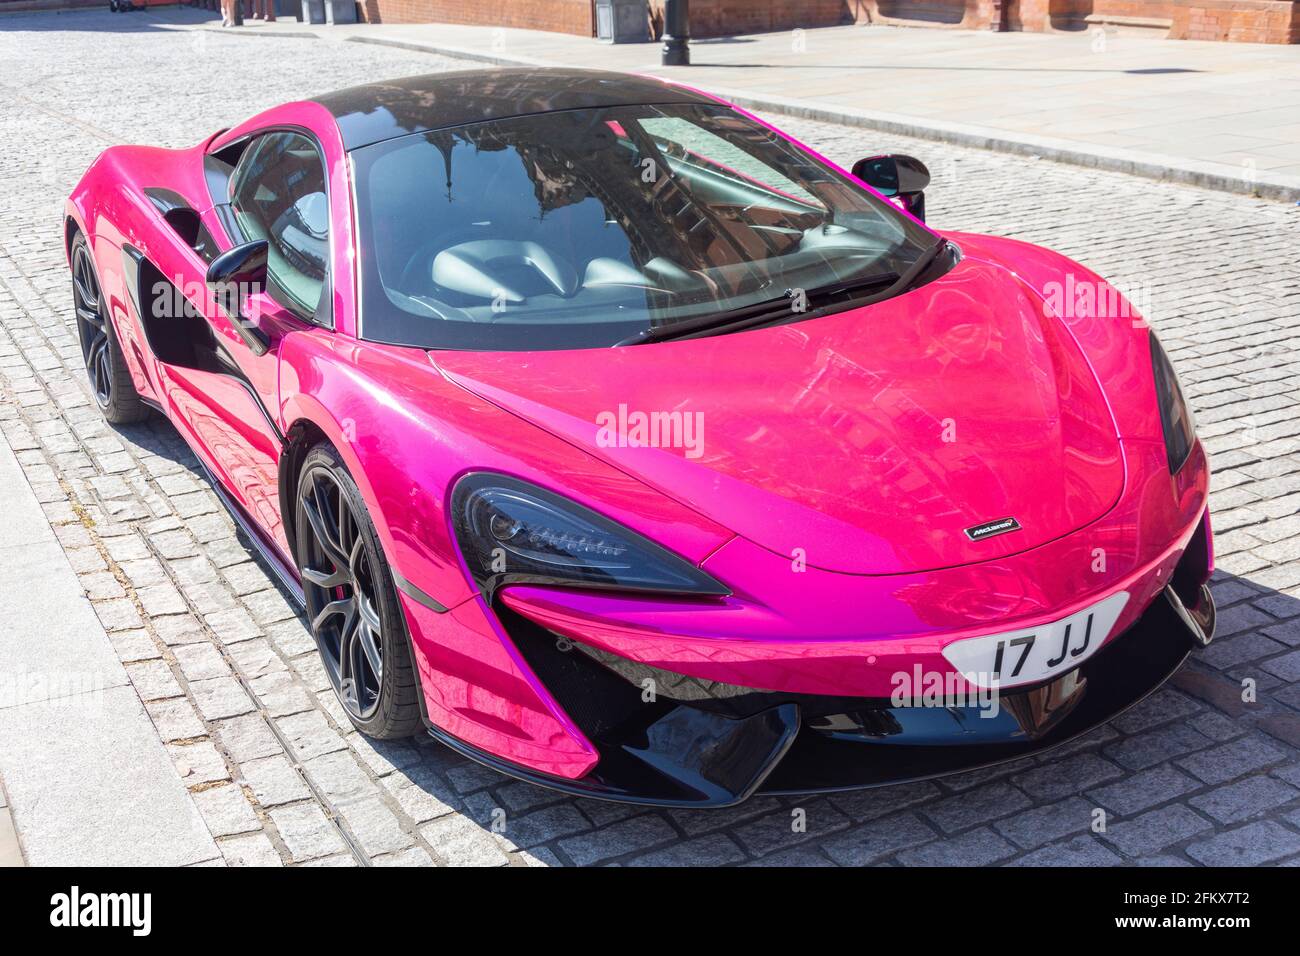 Pink McLaren 570S Supercar parked in Euston Road, King's Cross, London Borough of Camden, Greater London, England, United Kingdom Stock Photo